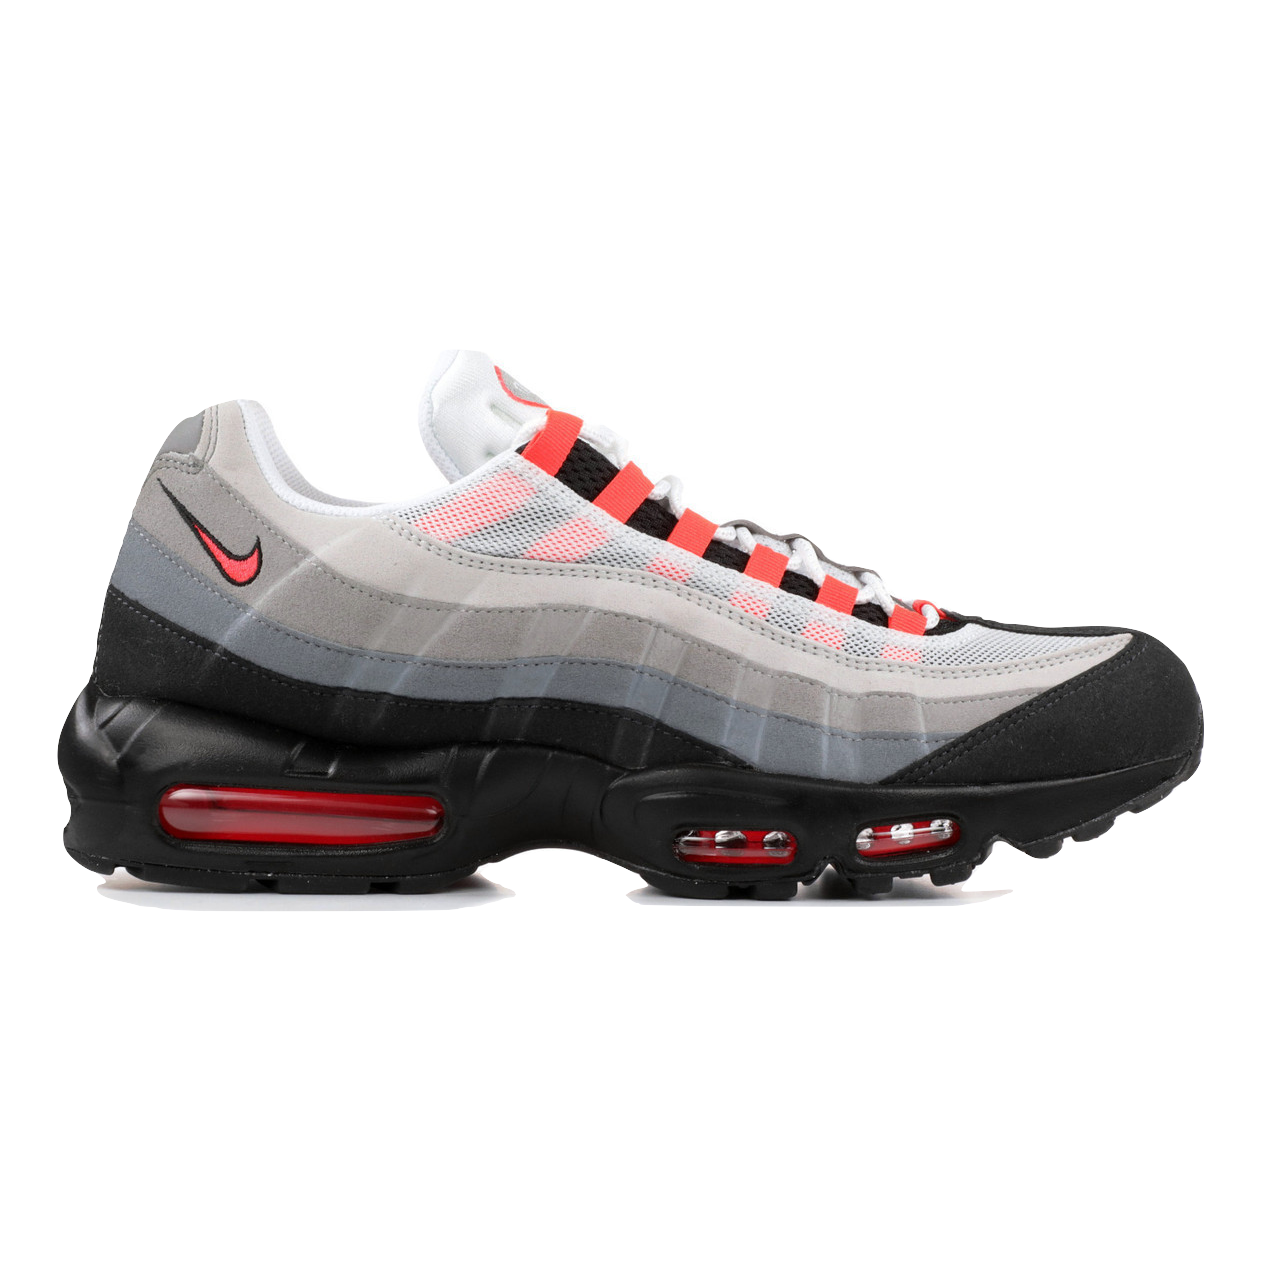 Air Max 95 Solar Red (2018) - Used